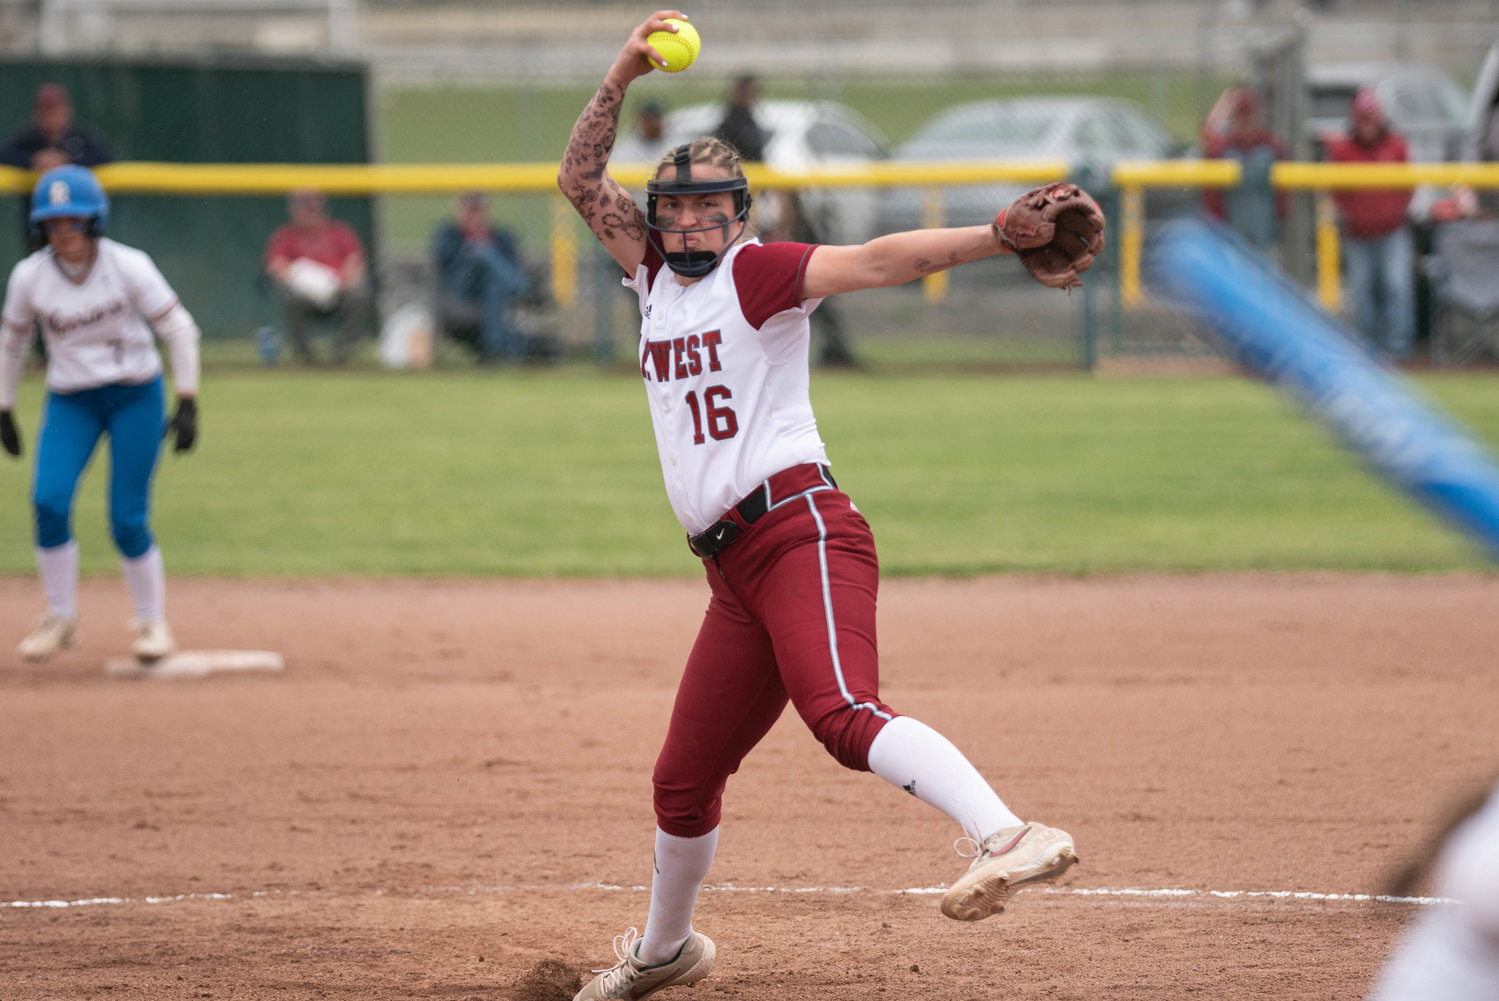 W.F. West pitcher Kamy Dacus winds up to deliver a pitch against Rochester in the 2A State Softball playoffs May 28 at Carlon Park in Selah.